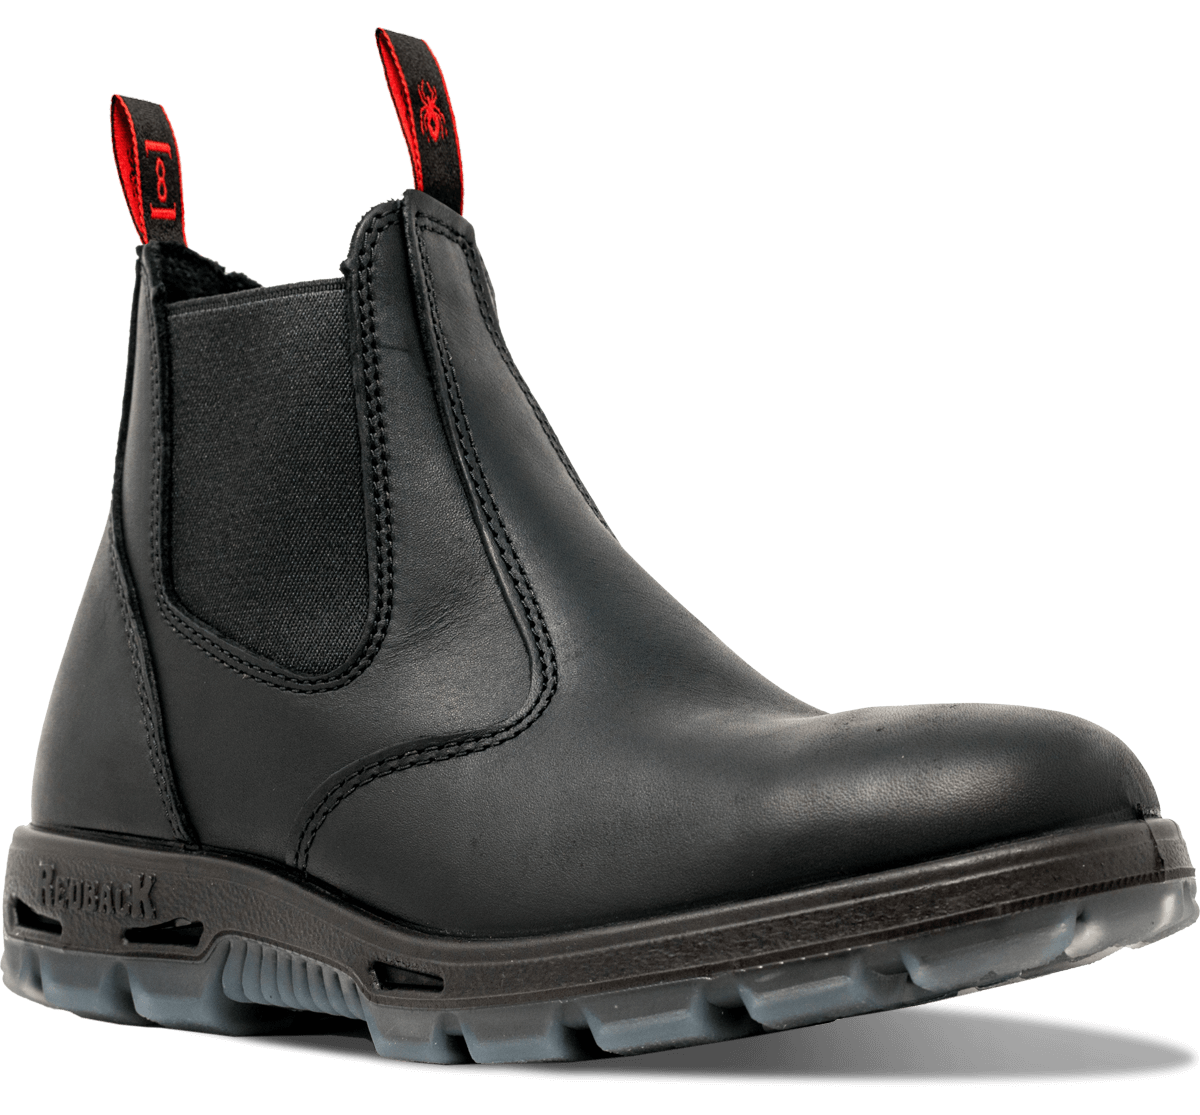 steel cap boots afterpay